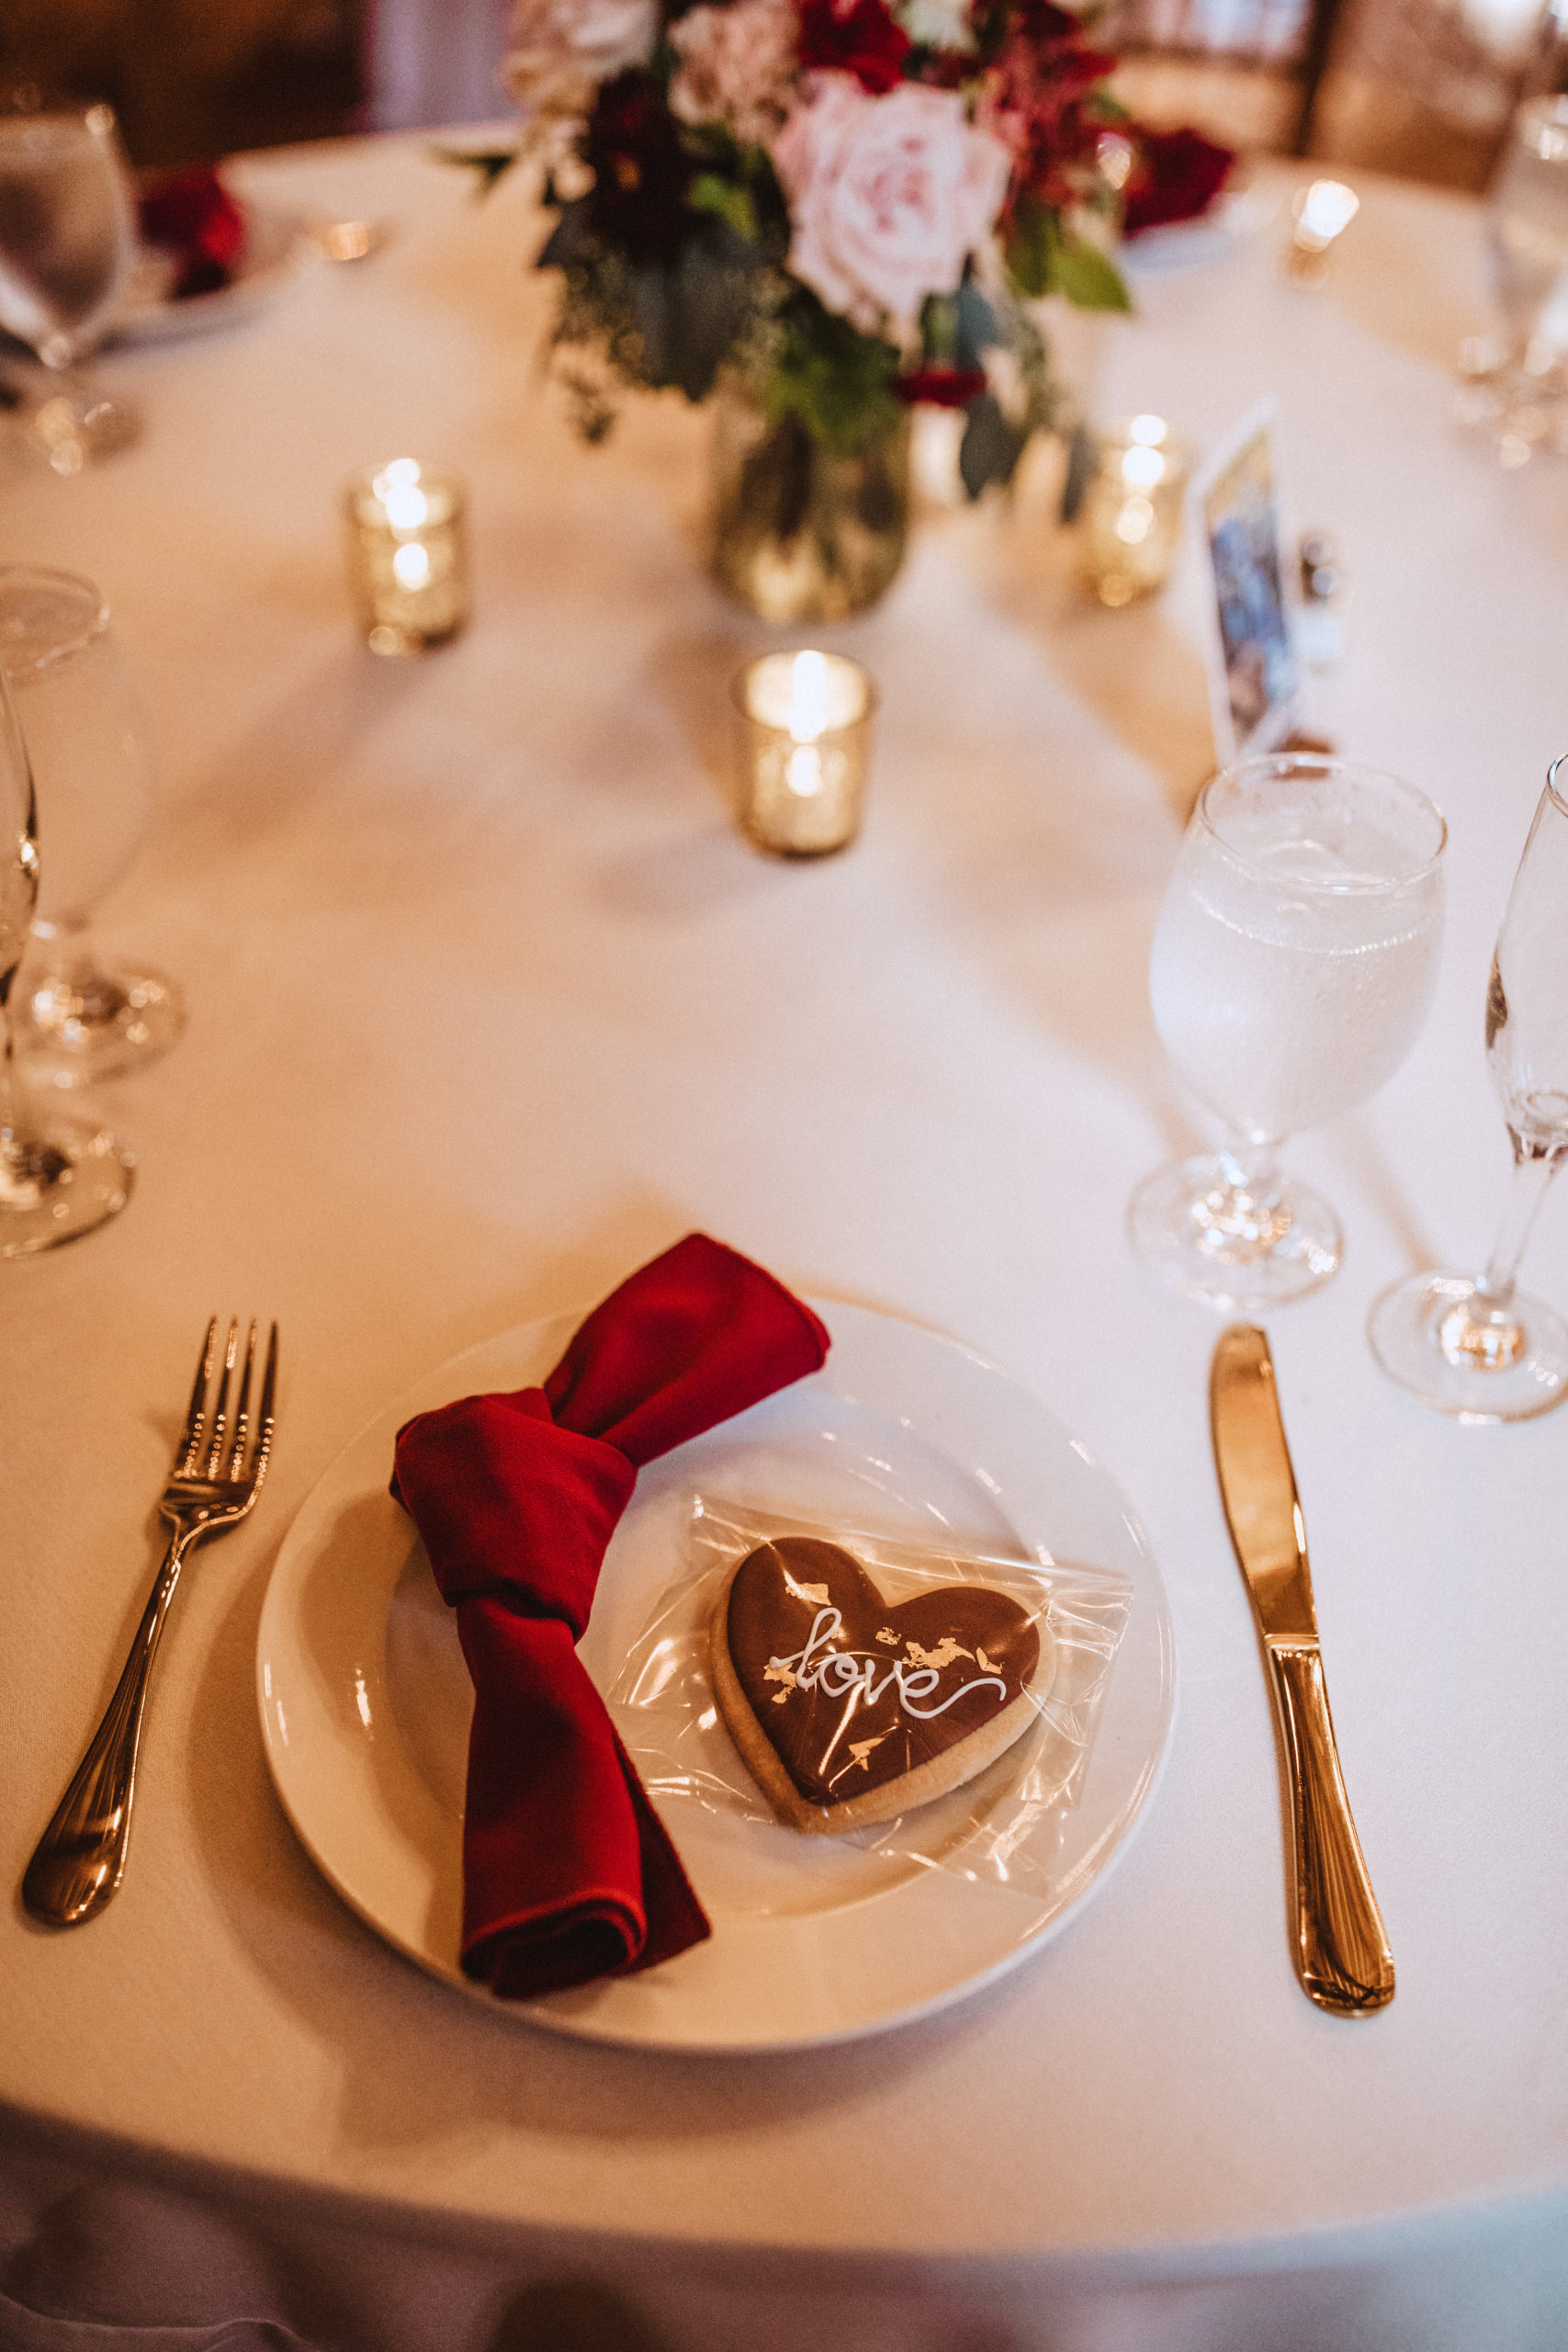 tablesetting with white plate, burgundy knotted napkin with love cookie as a favor